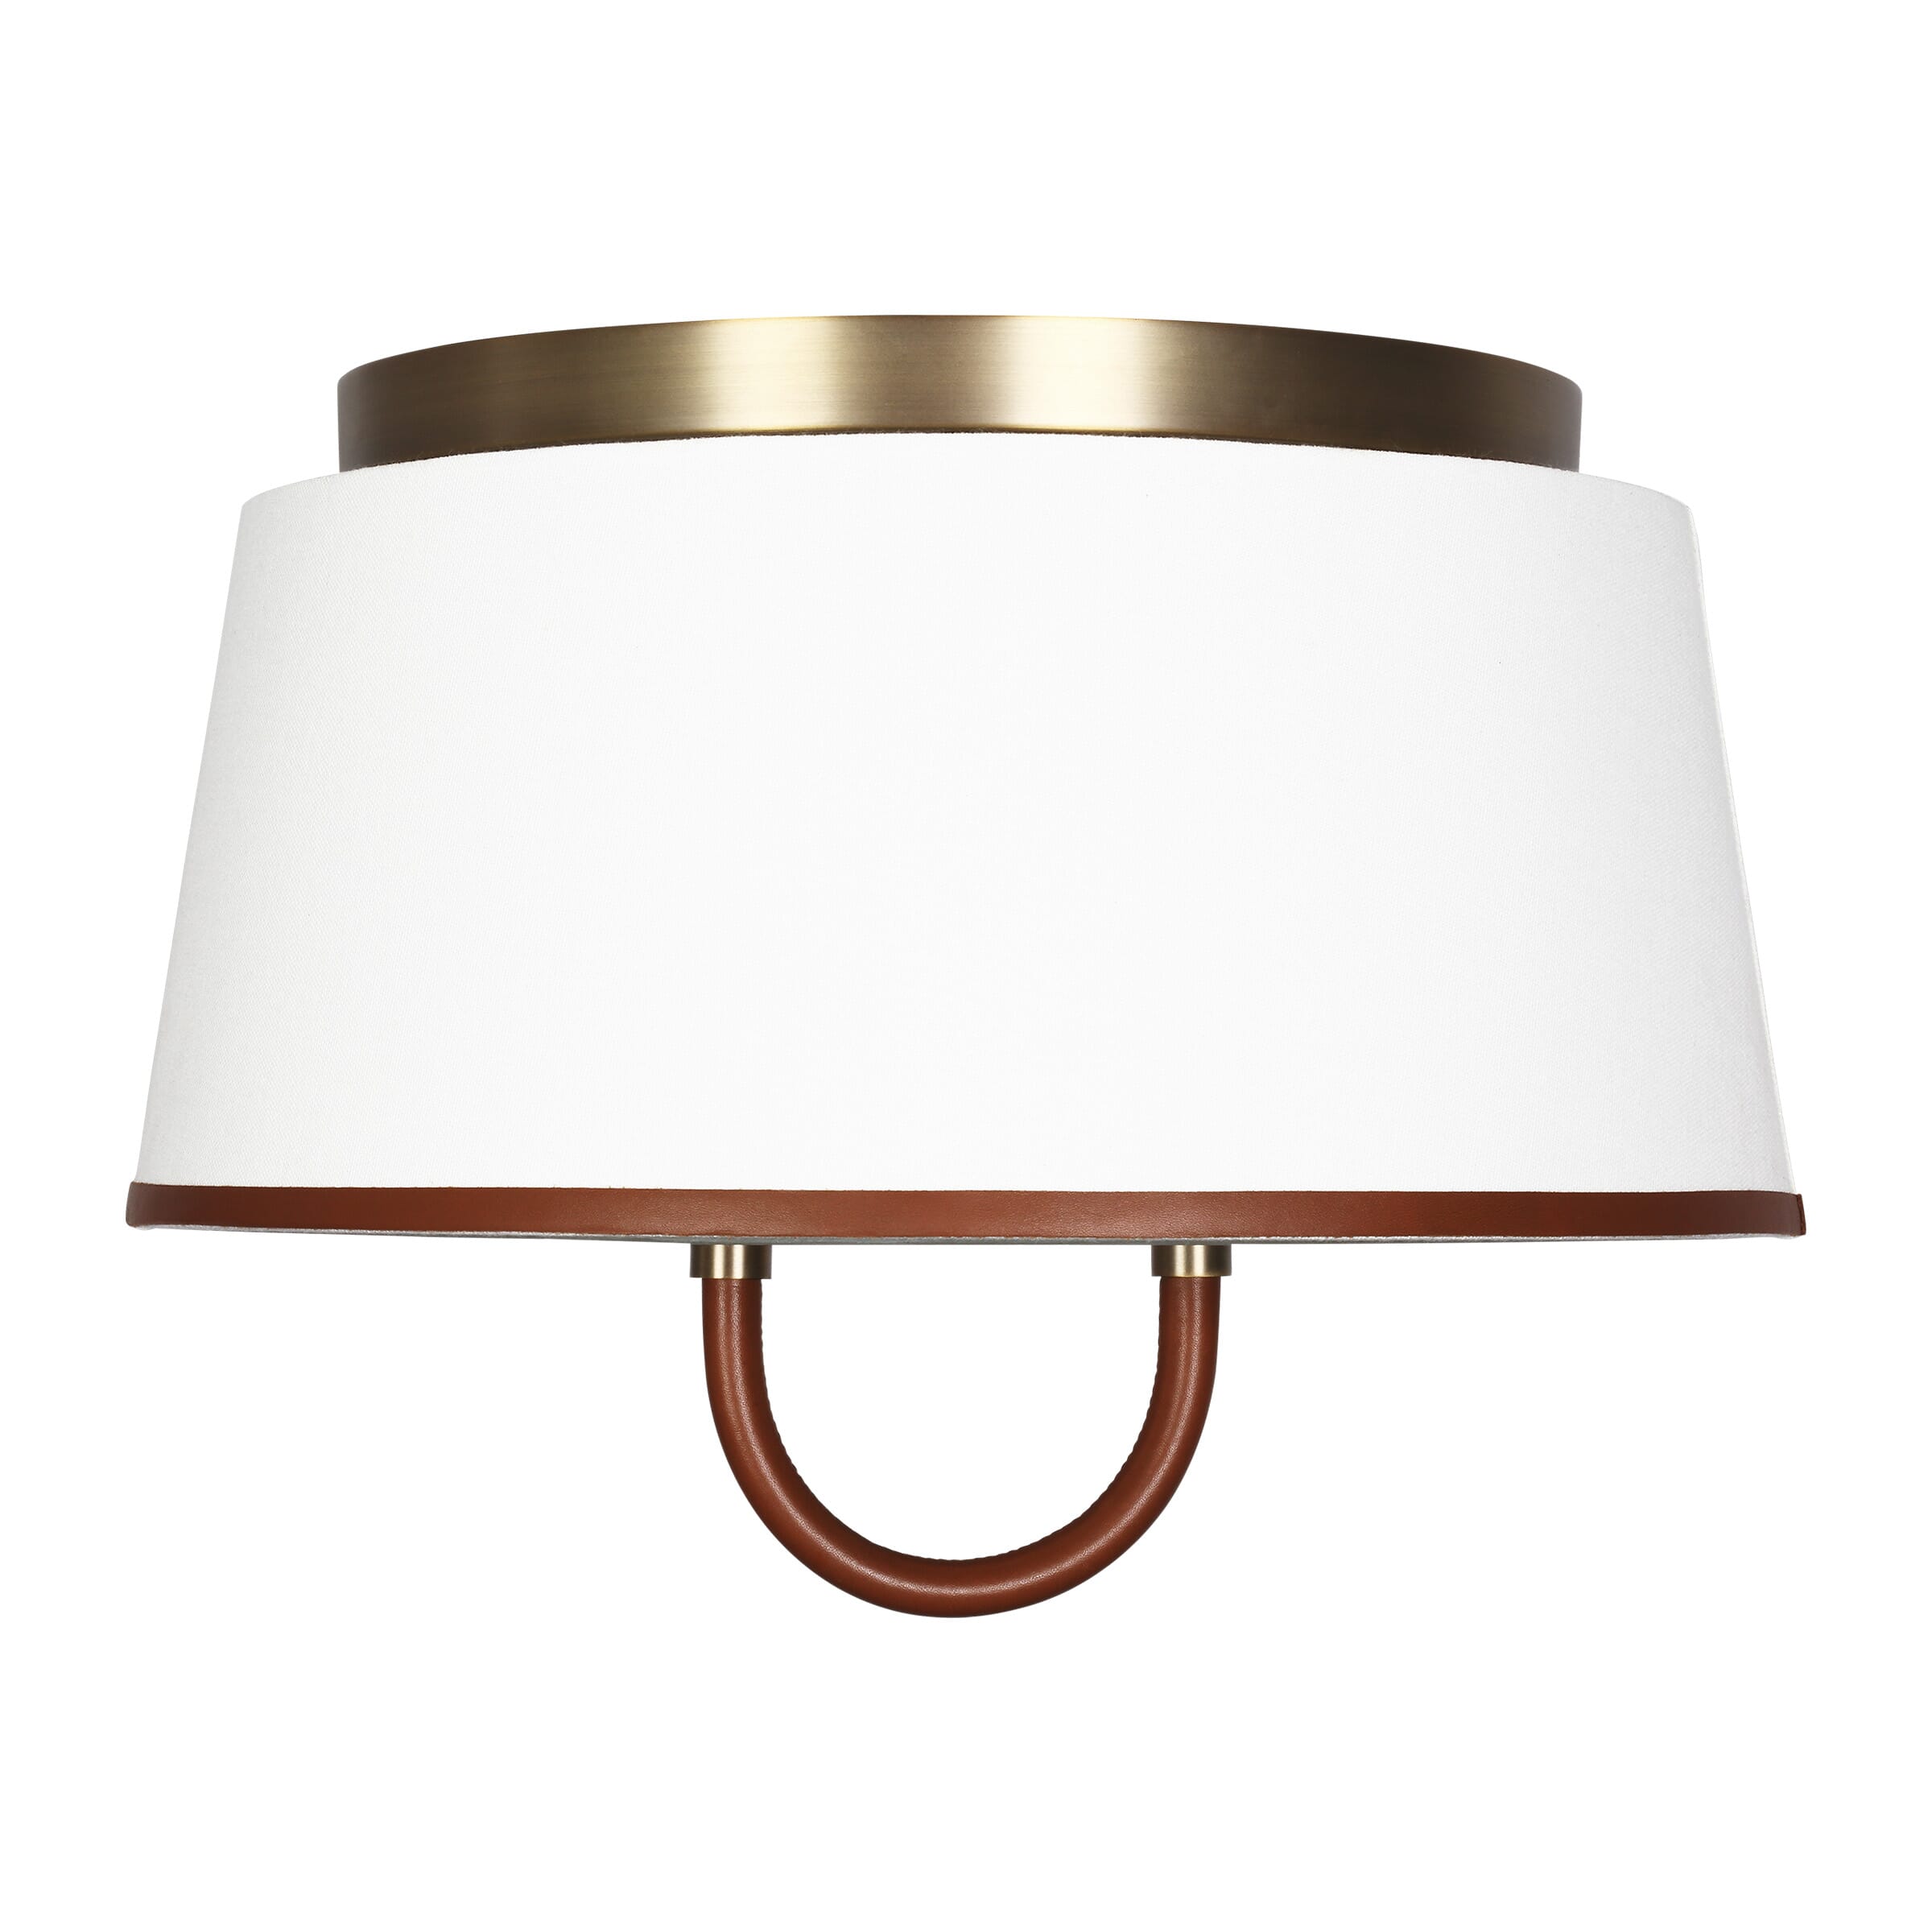 Visual Comfort Studio Katie 2-Light Ceiling Light in Time Worn Brass And  Saddle Leather by Ralph Lauren 